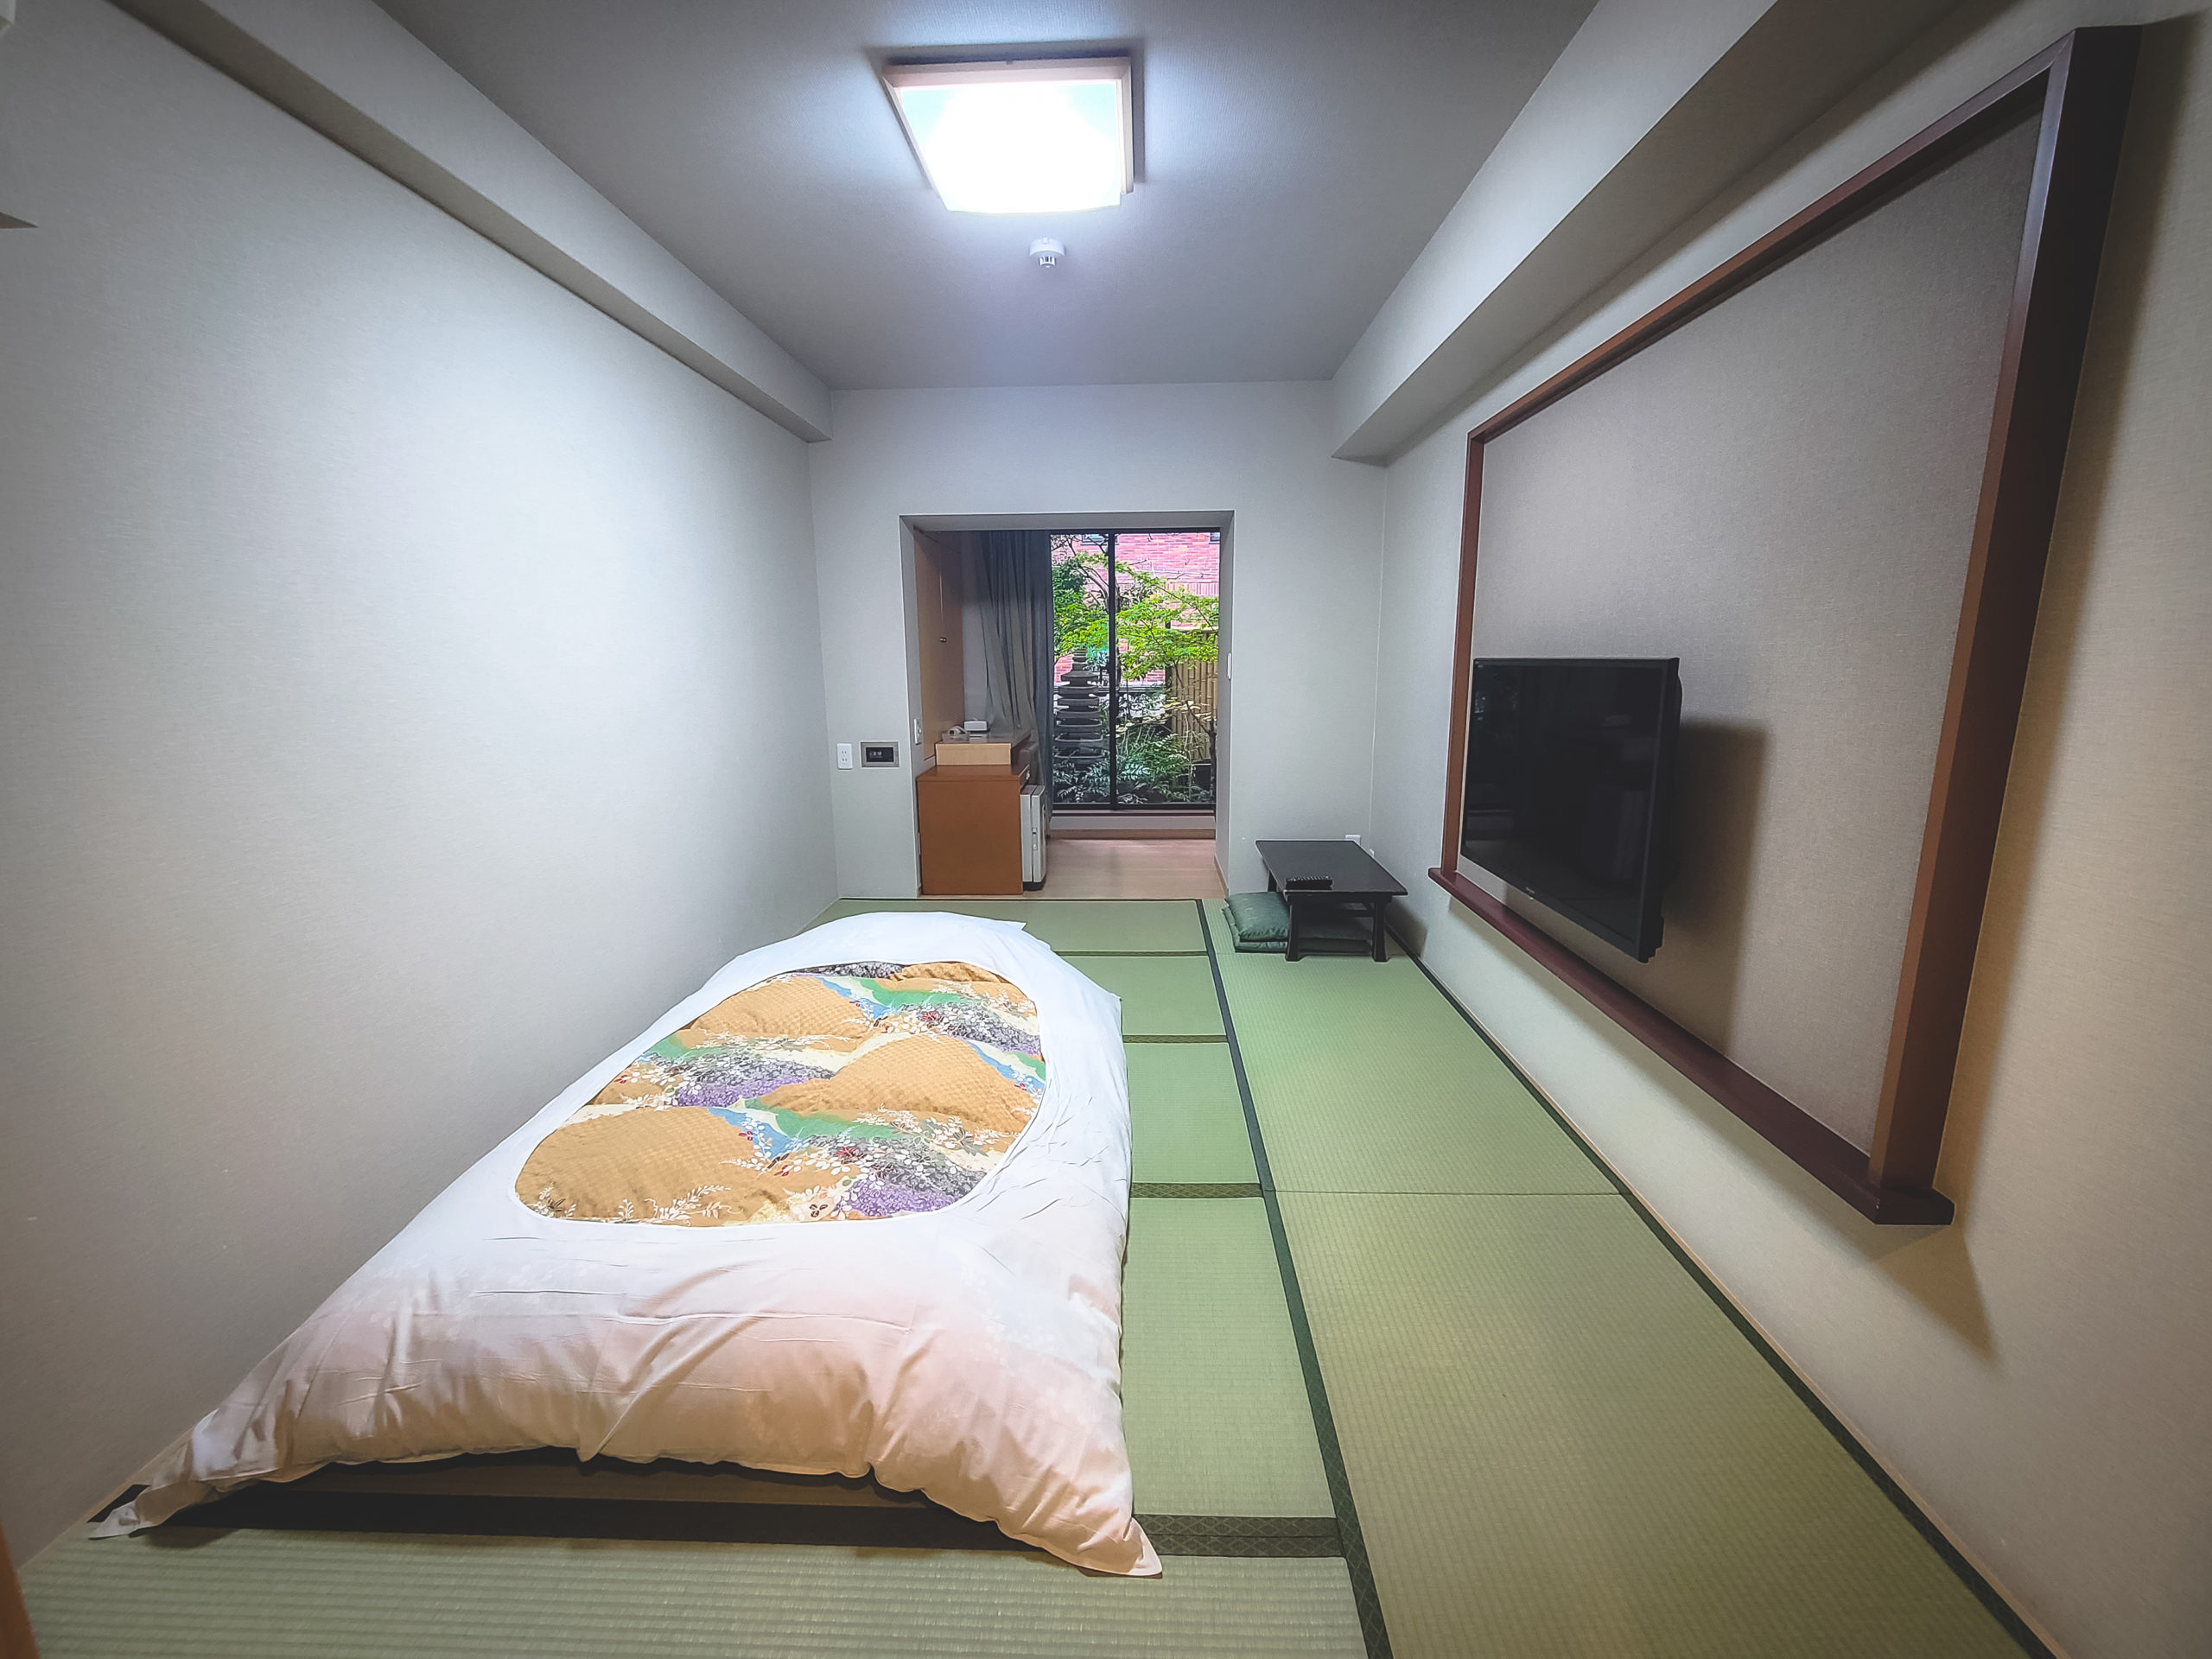 This washitsu looks out into a small garden situated on the roof of the floor below it